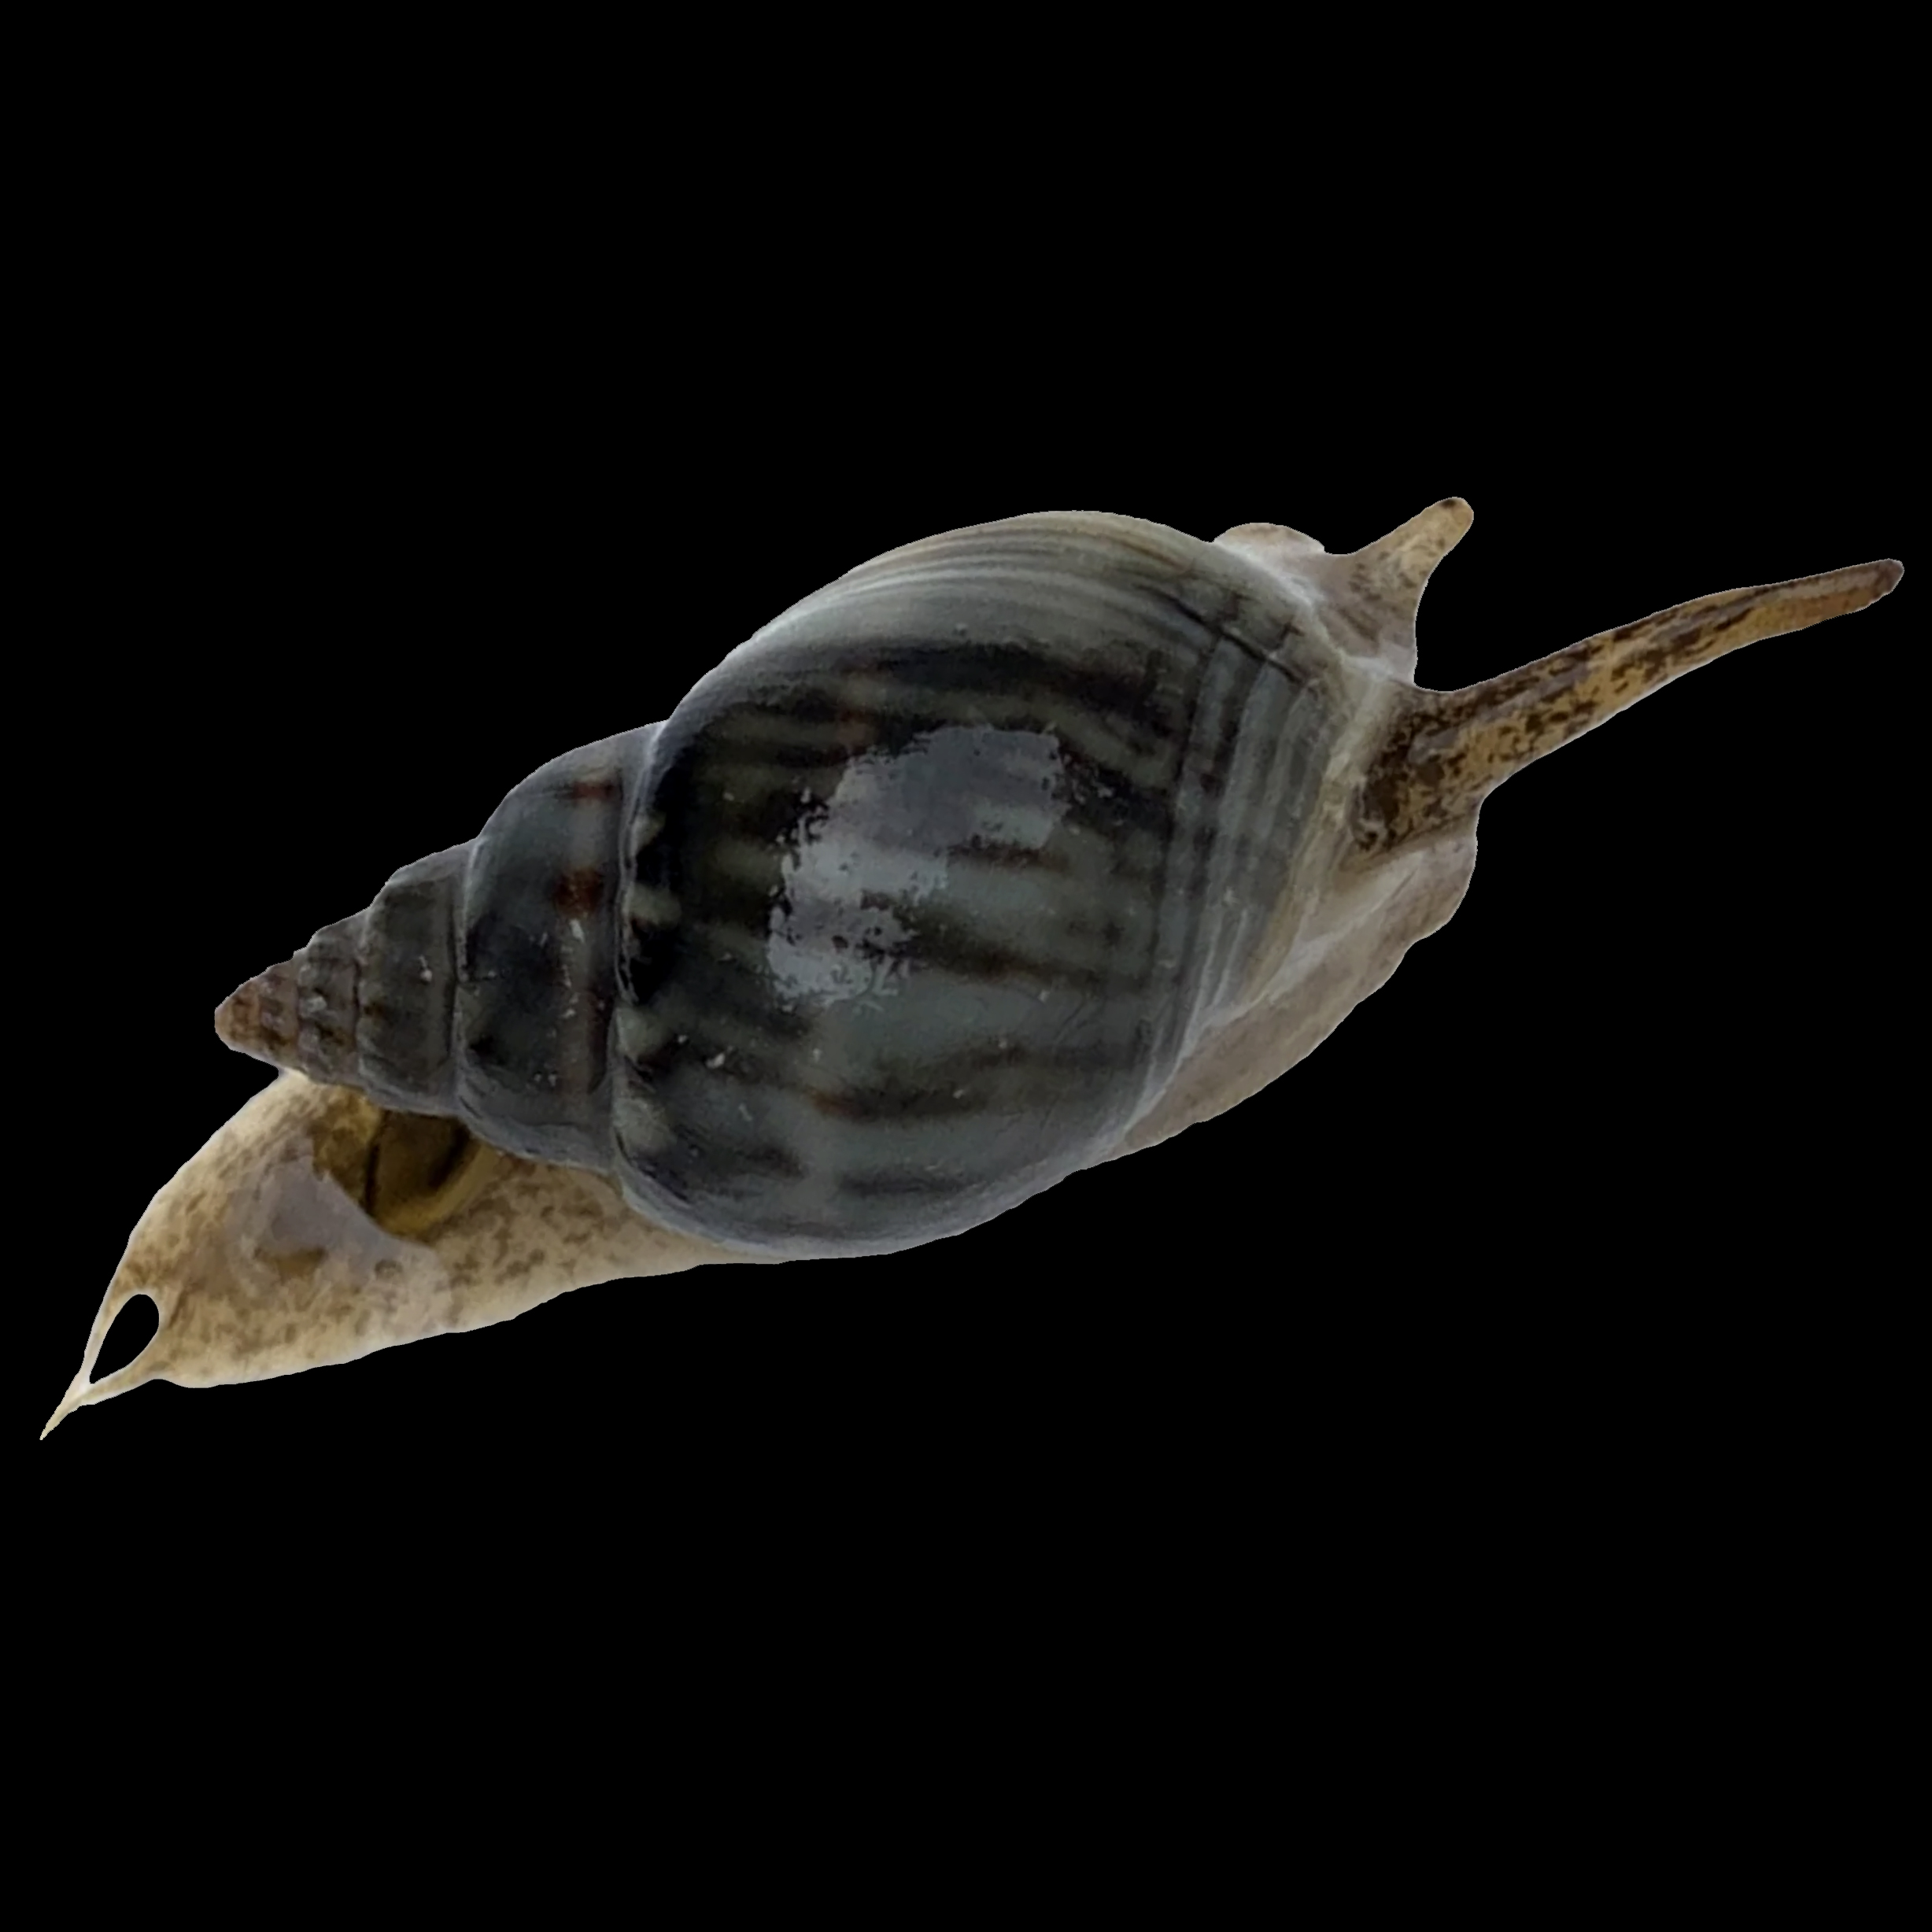 The Nassaurius Snail: A Beneficial Addition to Your Aquarium